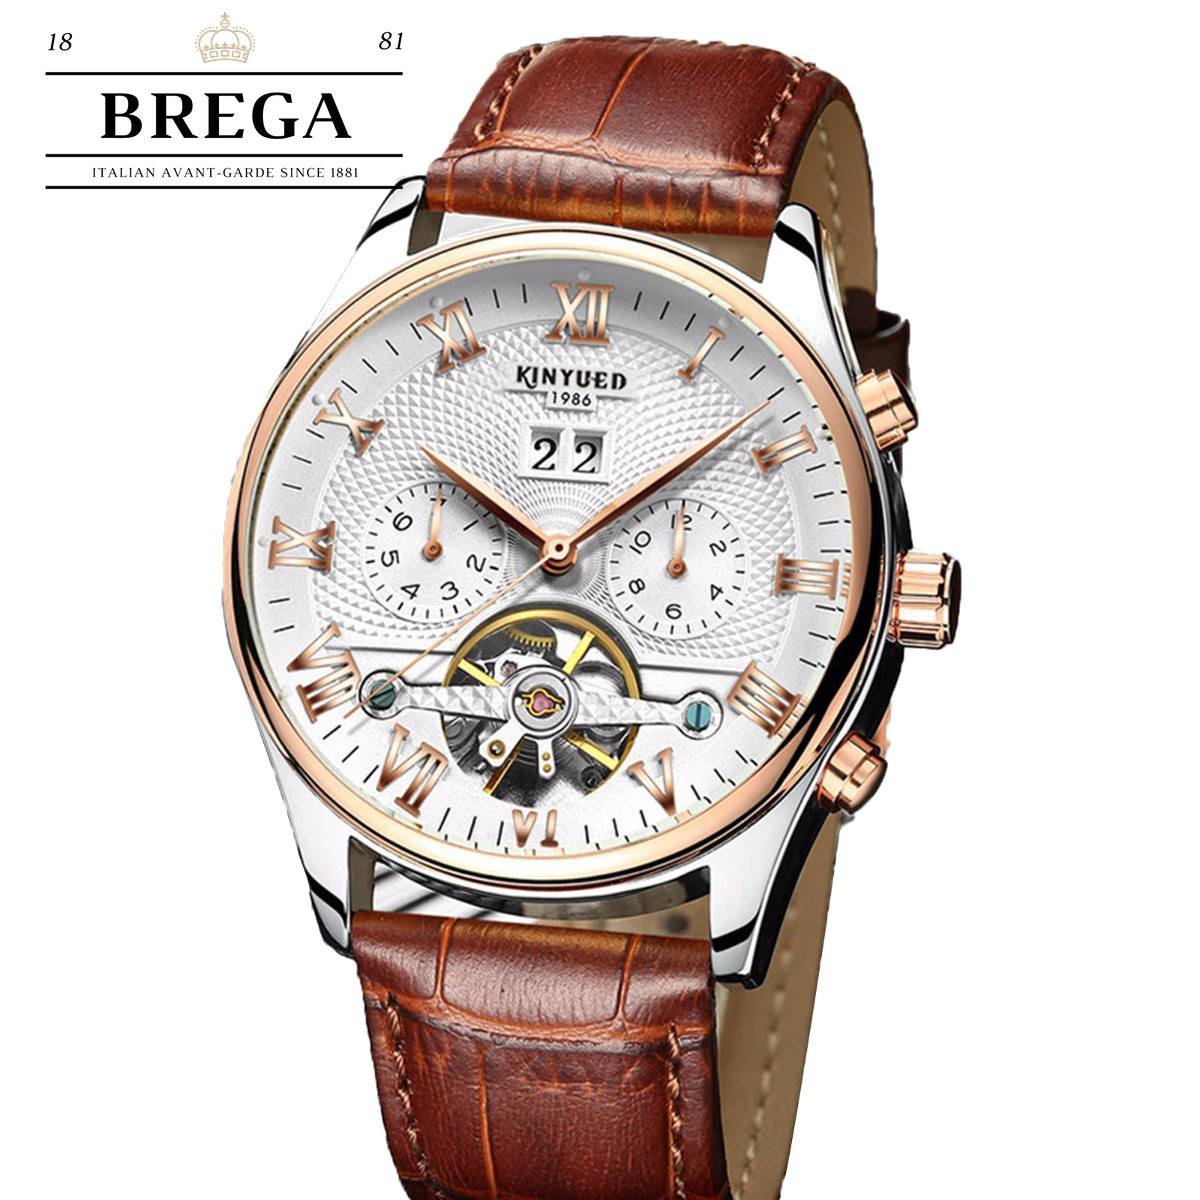 Meyhofer EASY-CLICK watch strap Brega 20mm dark brown leather smooth  surface racing light stitching